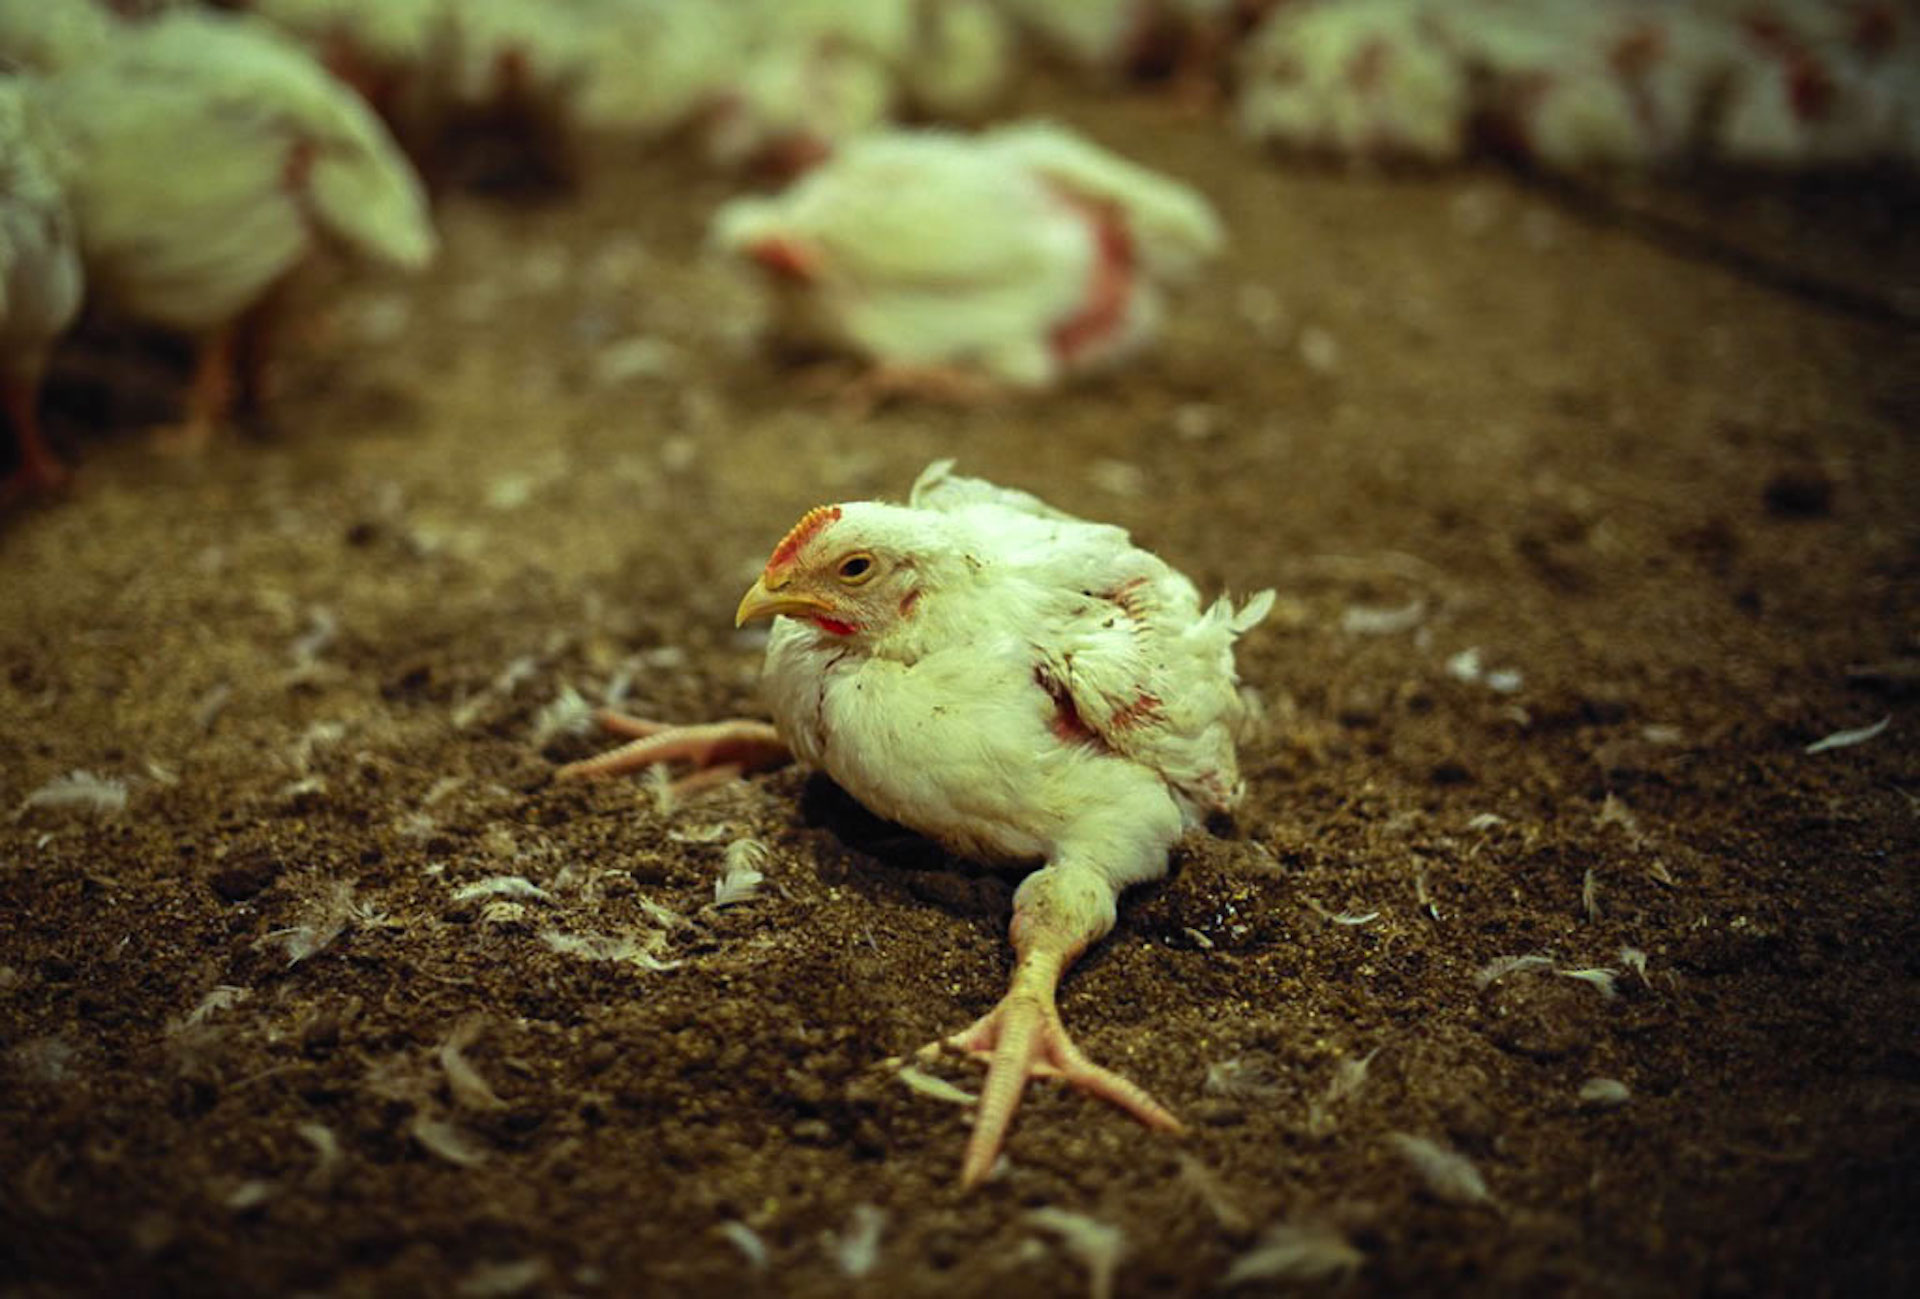 This factory-farmed chicken is how the majority of American chickens are raised.